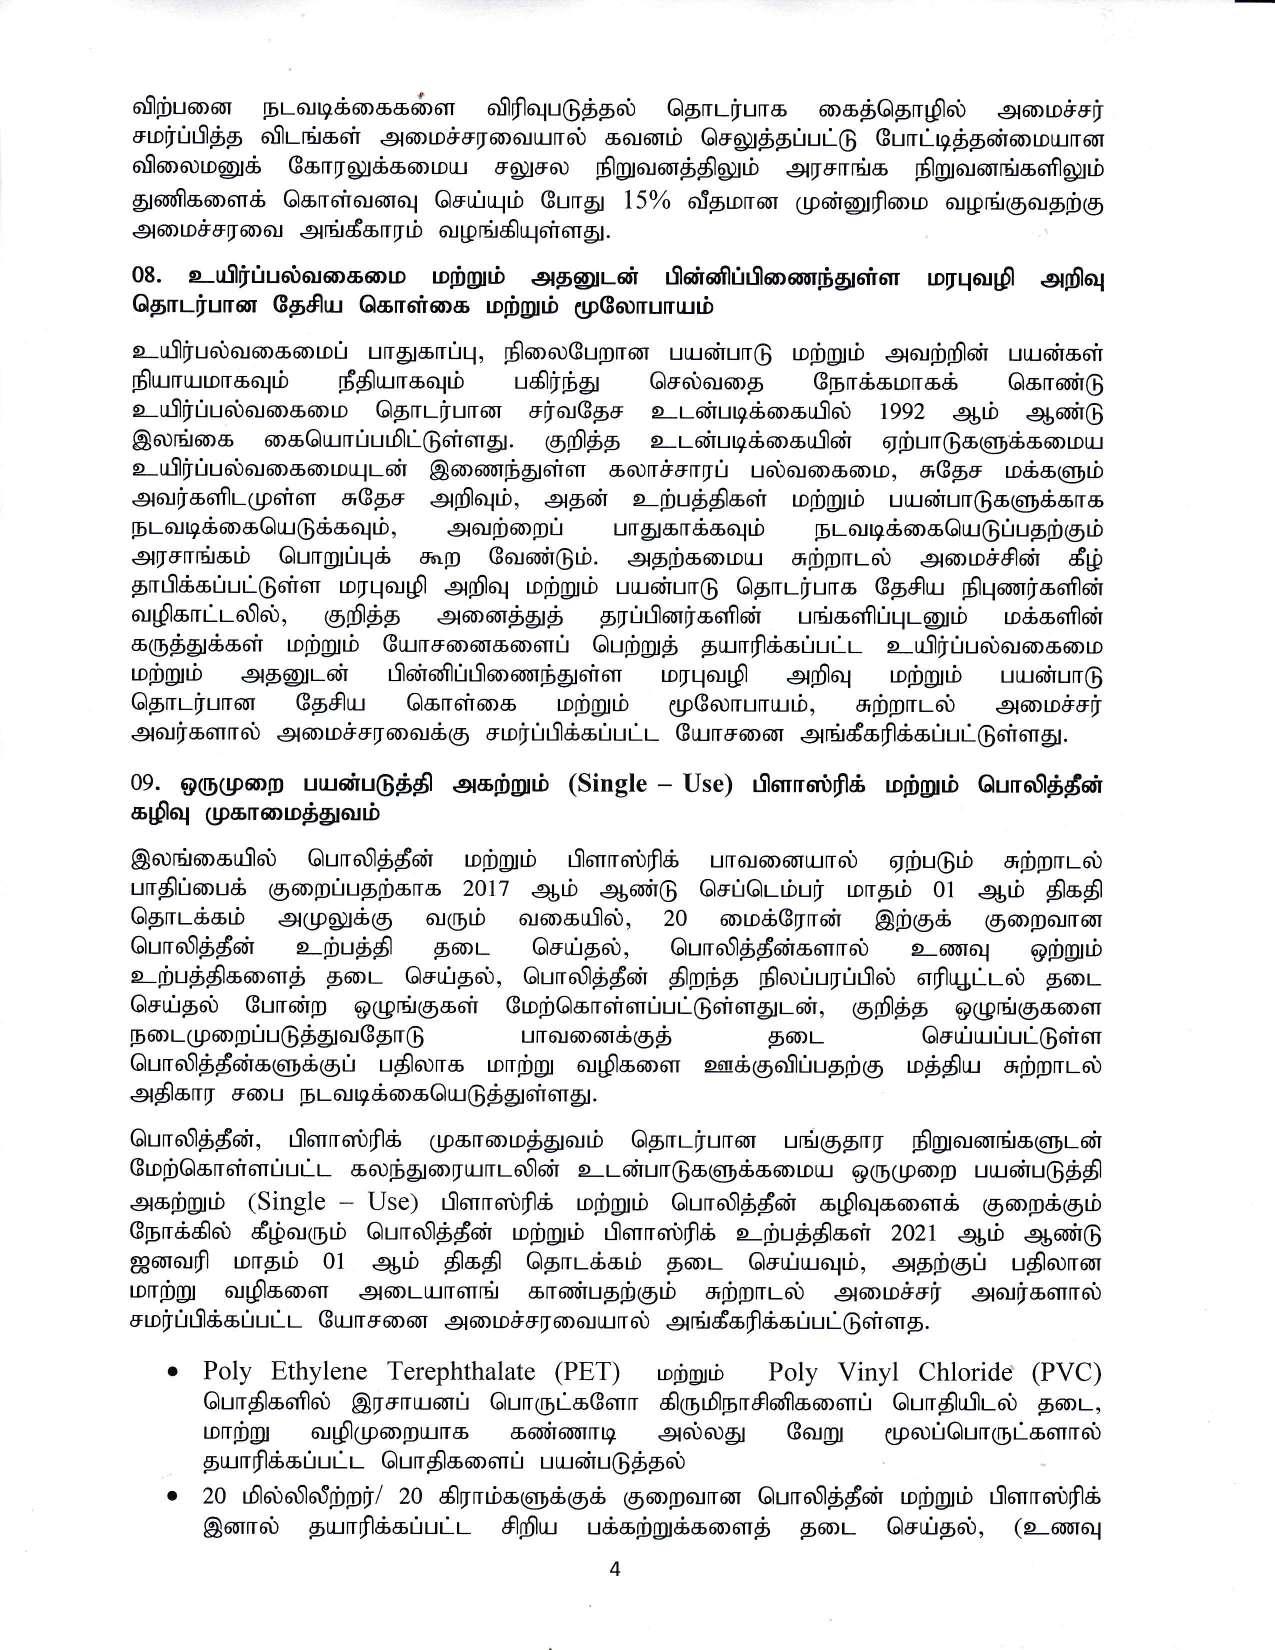 Cabinet Decision on 19.10.2020 Tamil compressed page 004